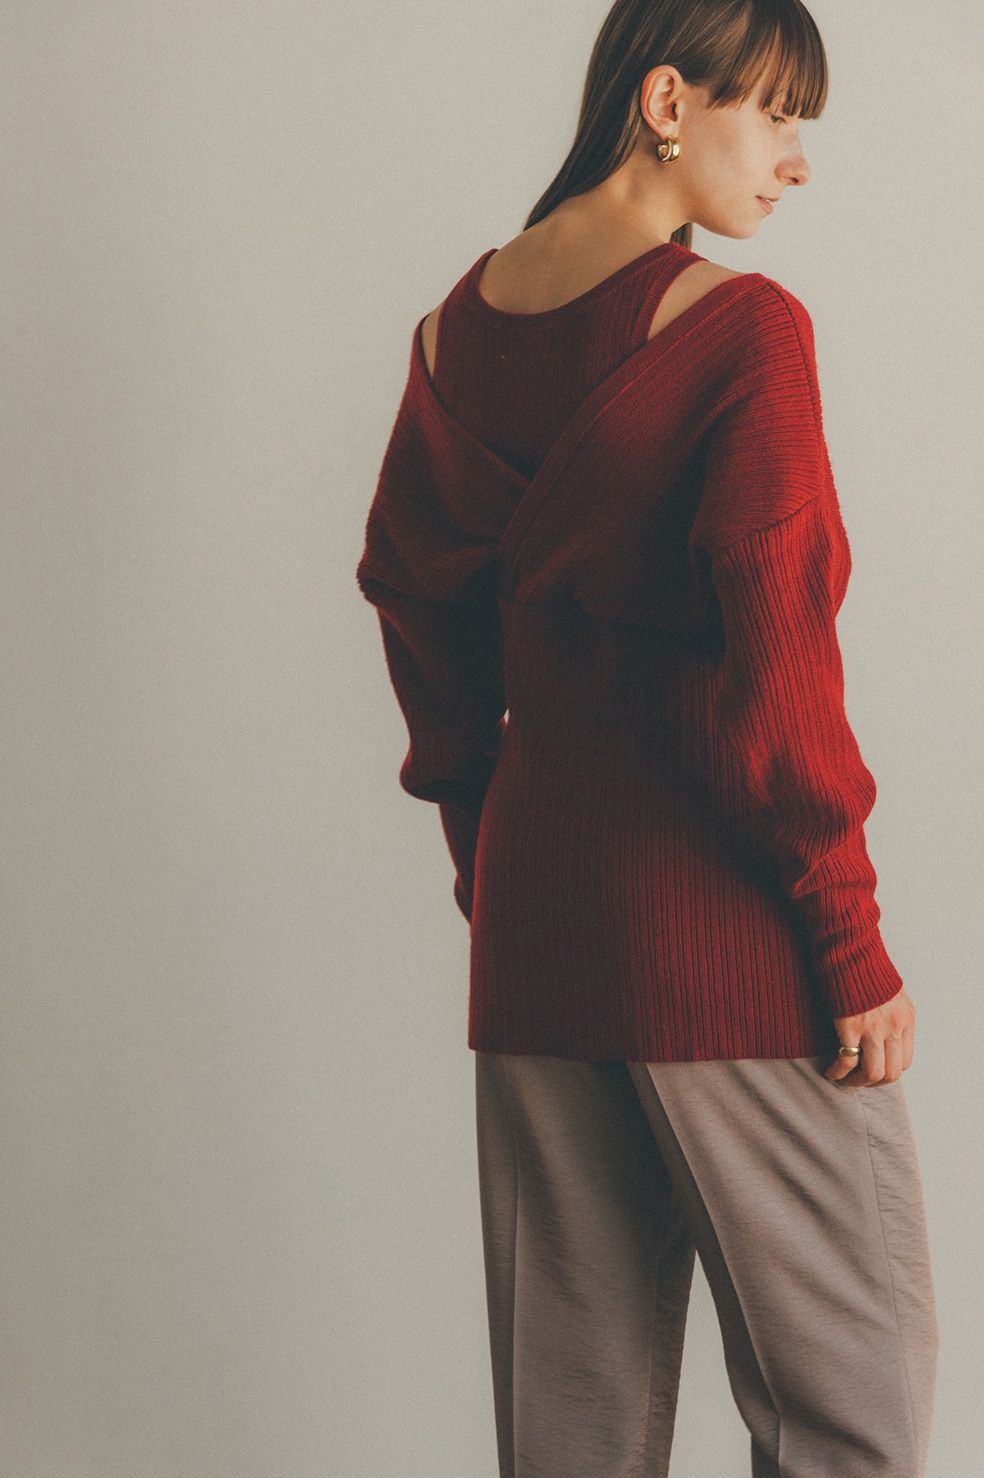 CLANE - レイヤーニットトップス - CACHE COEUR LAYER KNIT TOPS RED ...